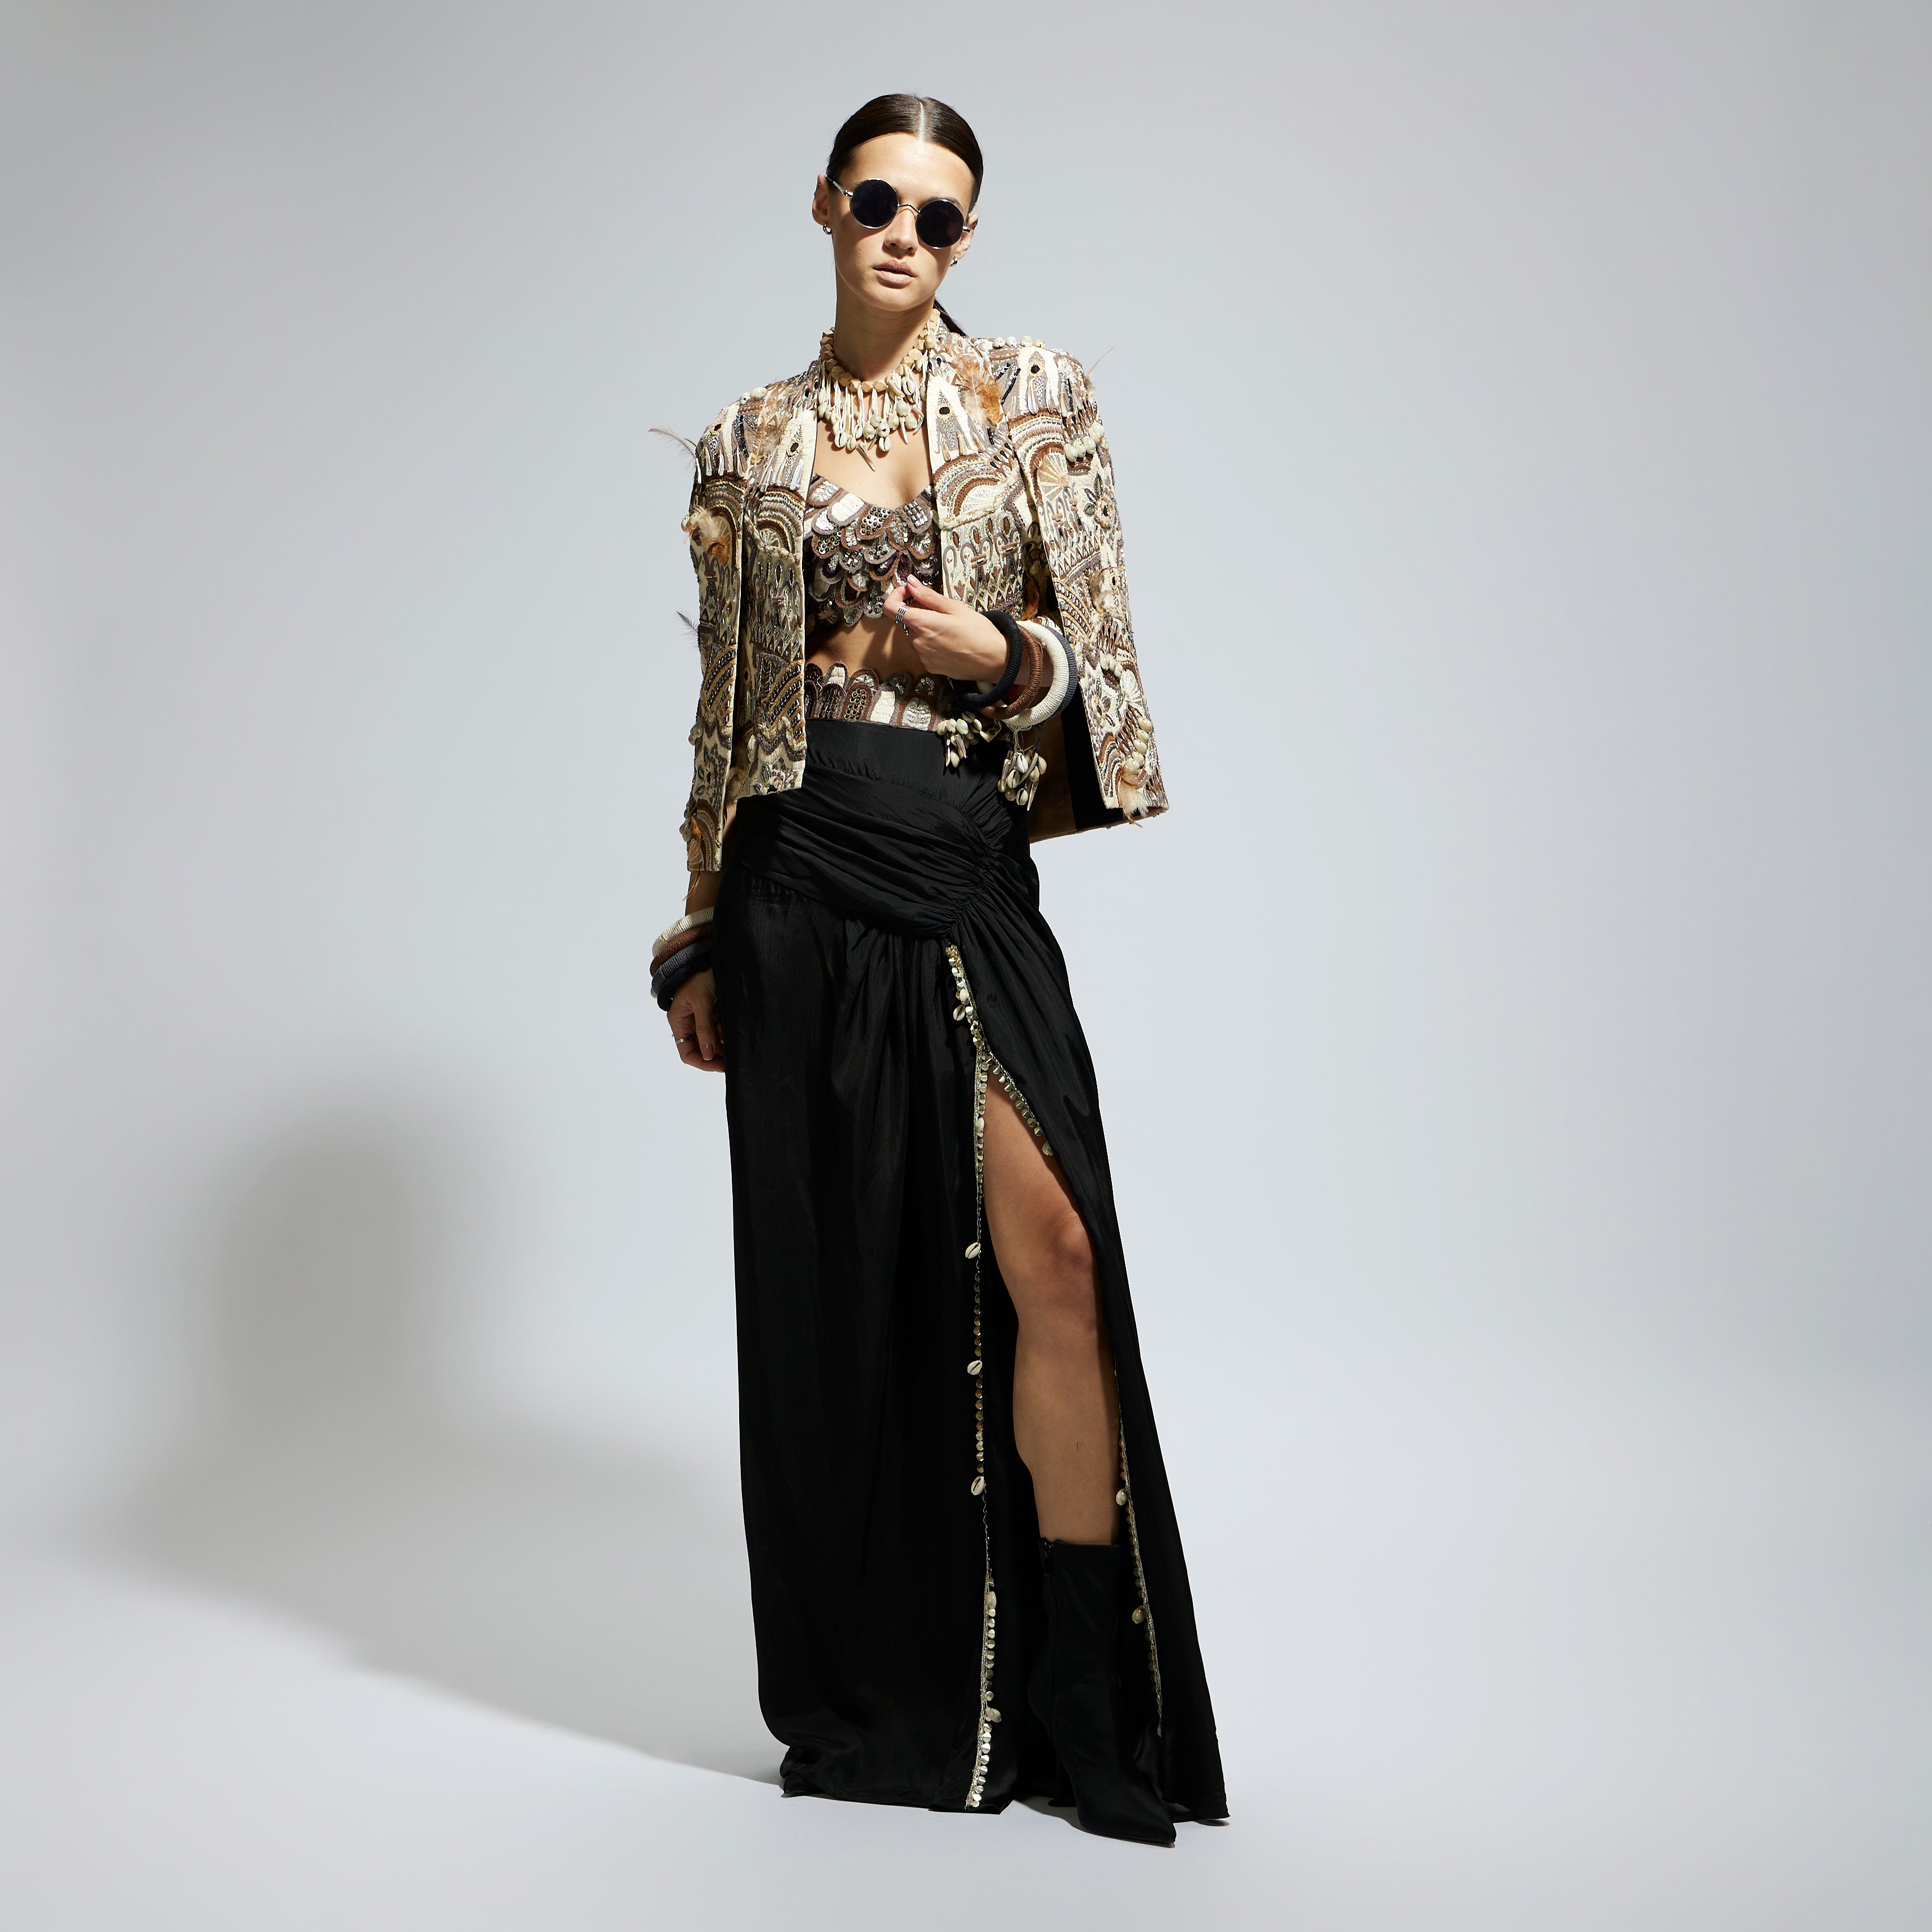 IVORY ABSTRACT FEATHER CAPE JACKET PAIRED WITH 3D SCALLOP BUSTIER AND BLACK HIGH SLIT SKIRT